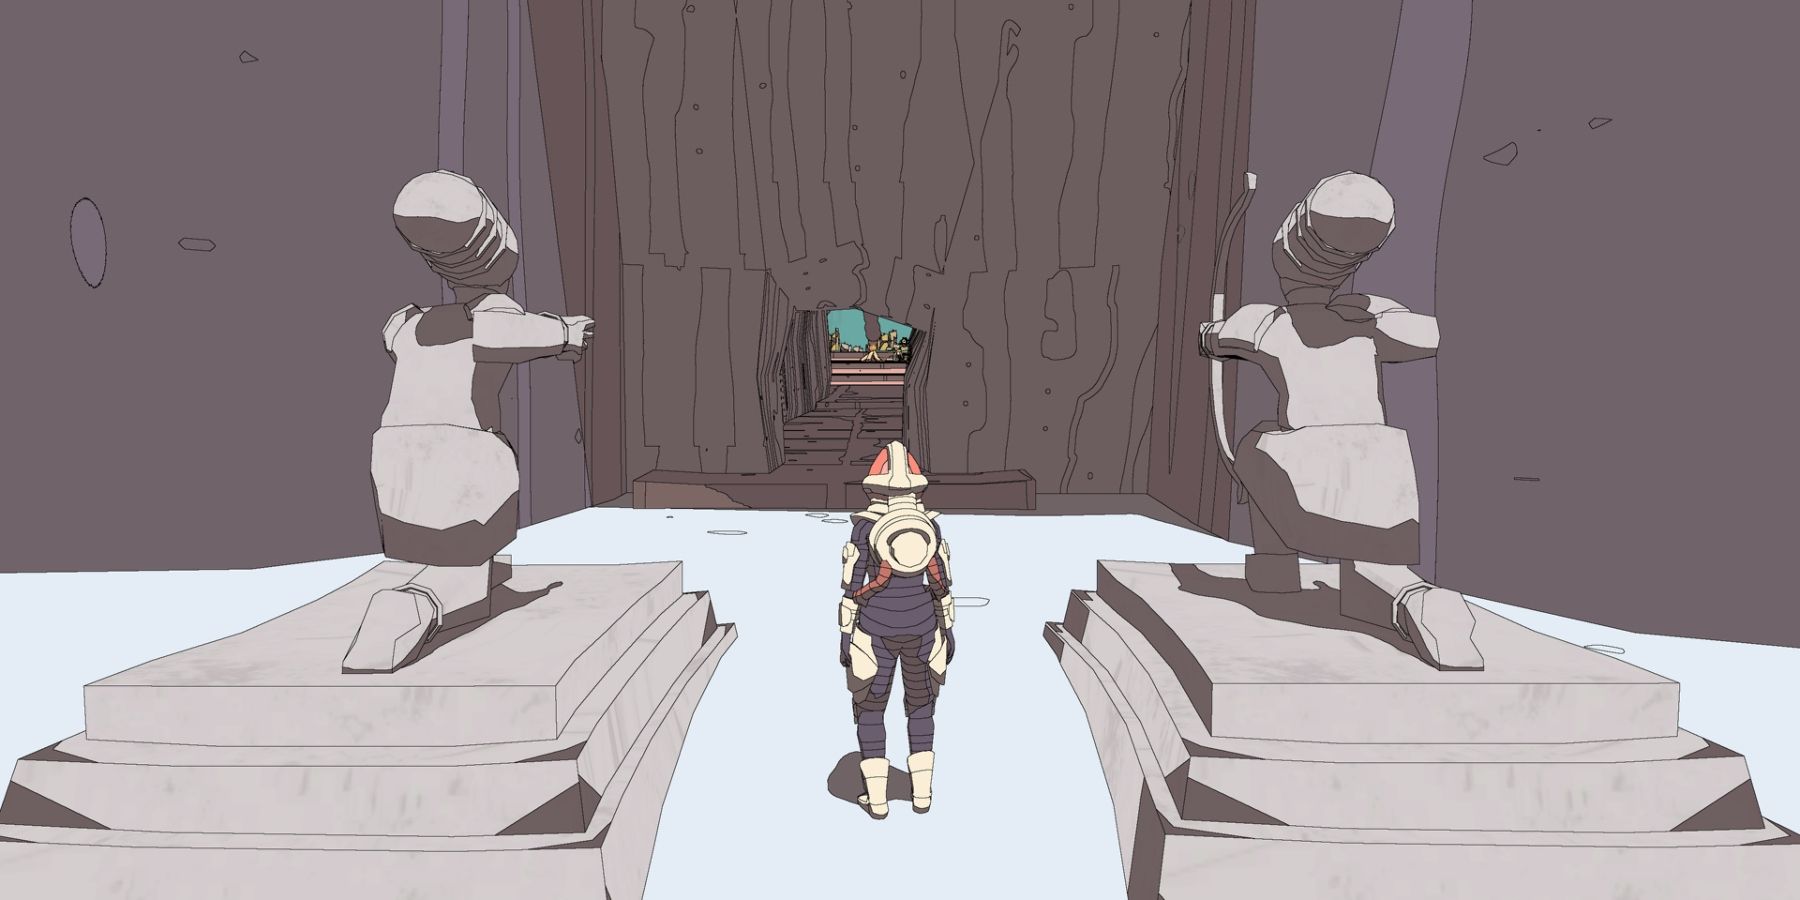 Sable standing between two archer statues in front of cave entrance